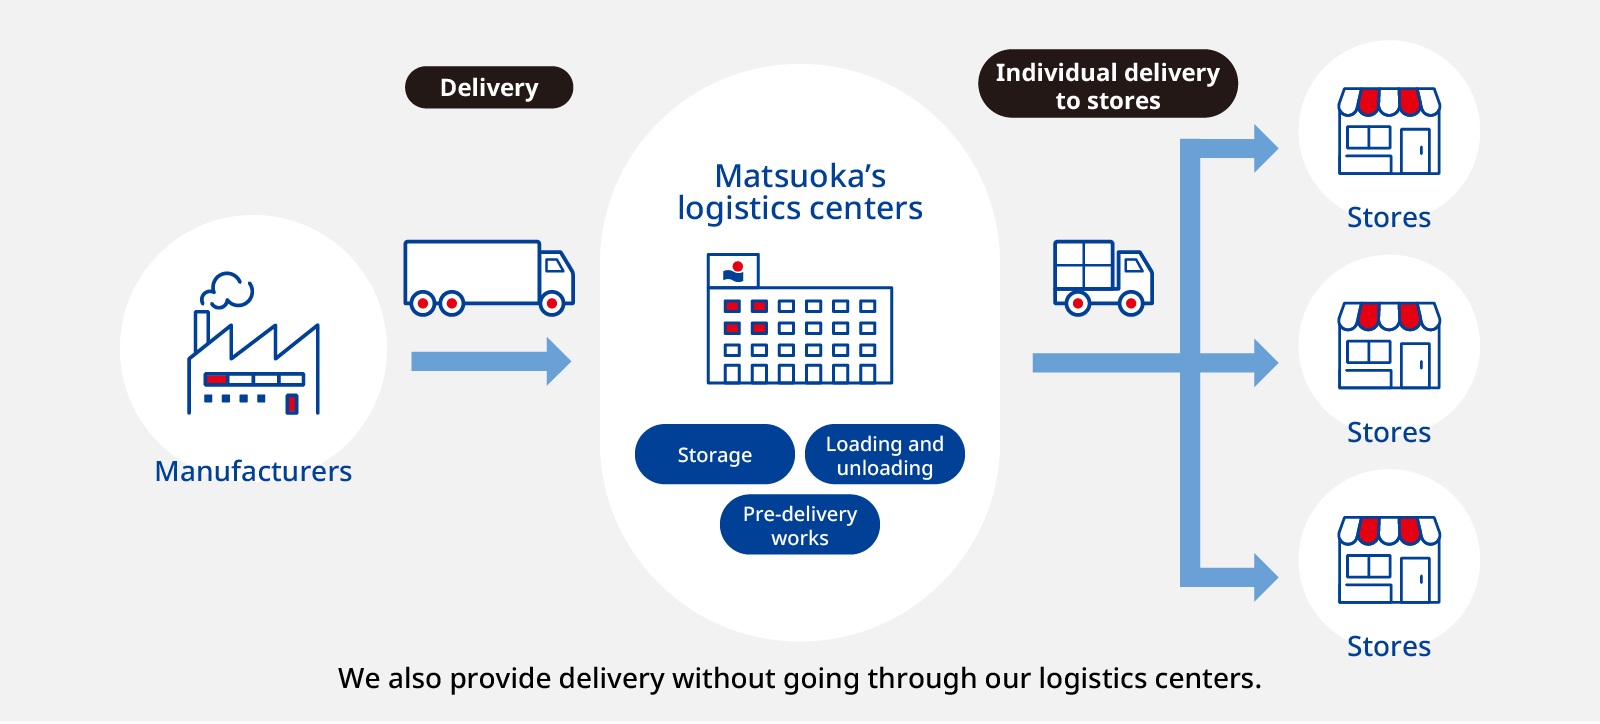 Pre-delivery works Matsuoka’s logistics centers Individual delivery to stores Stores We also provide delivery without going through our logistics centers.